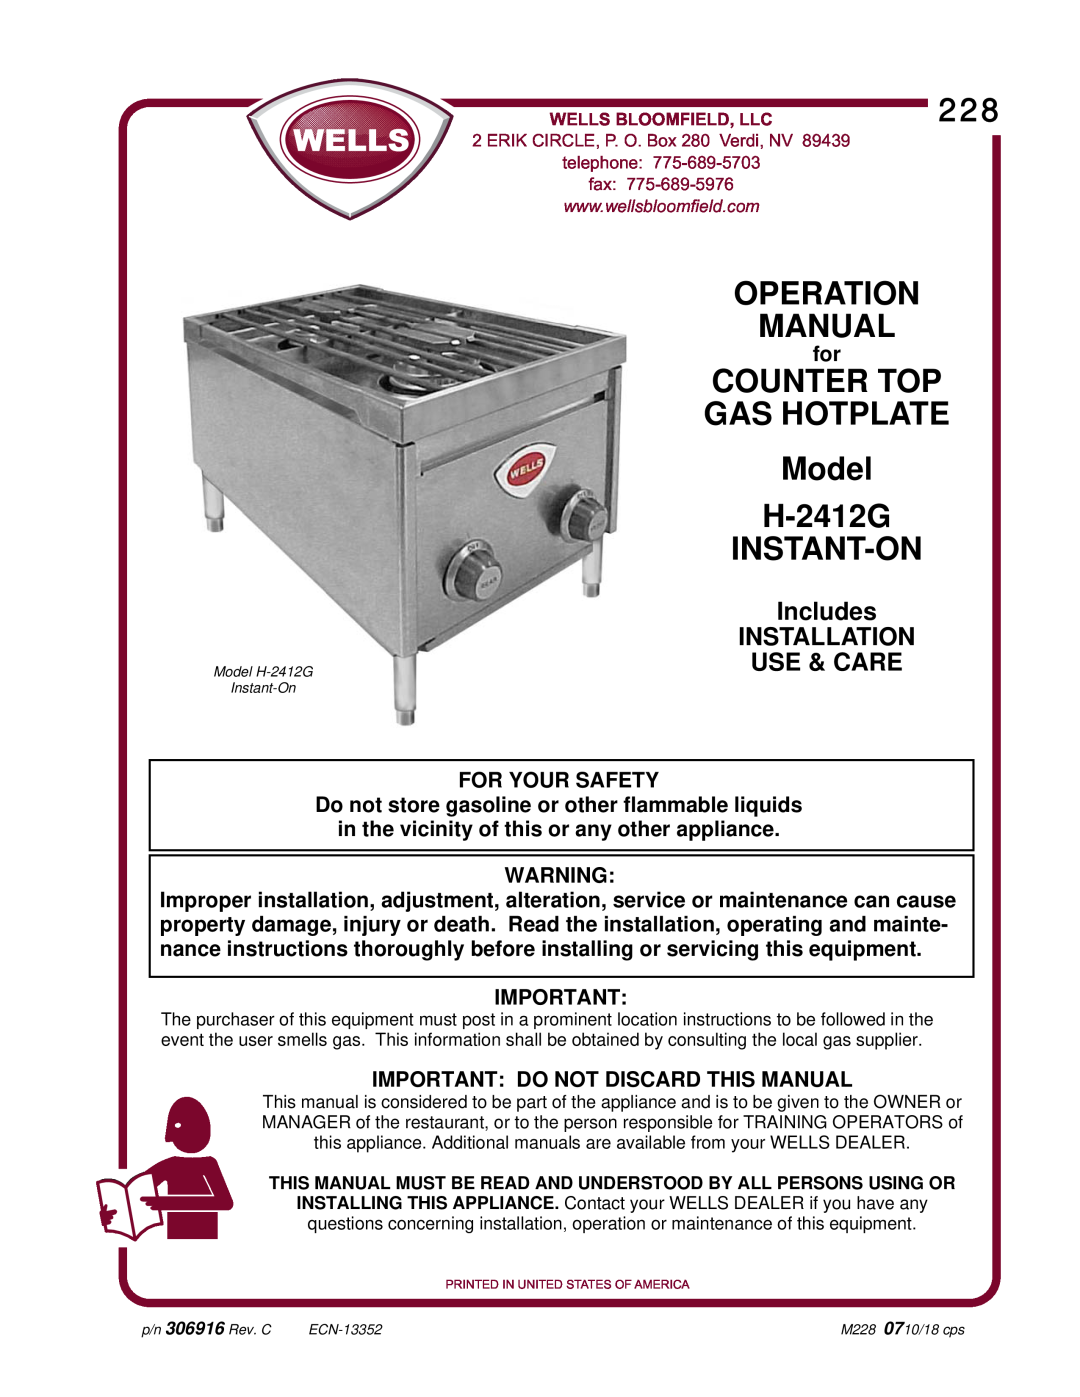 Wells operation manual Important Do Not Discard This Manual, COUNTER TOP GAS HOTPLATE Model H-2412G INSTANT-ON 